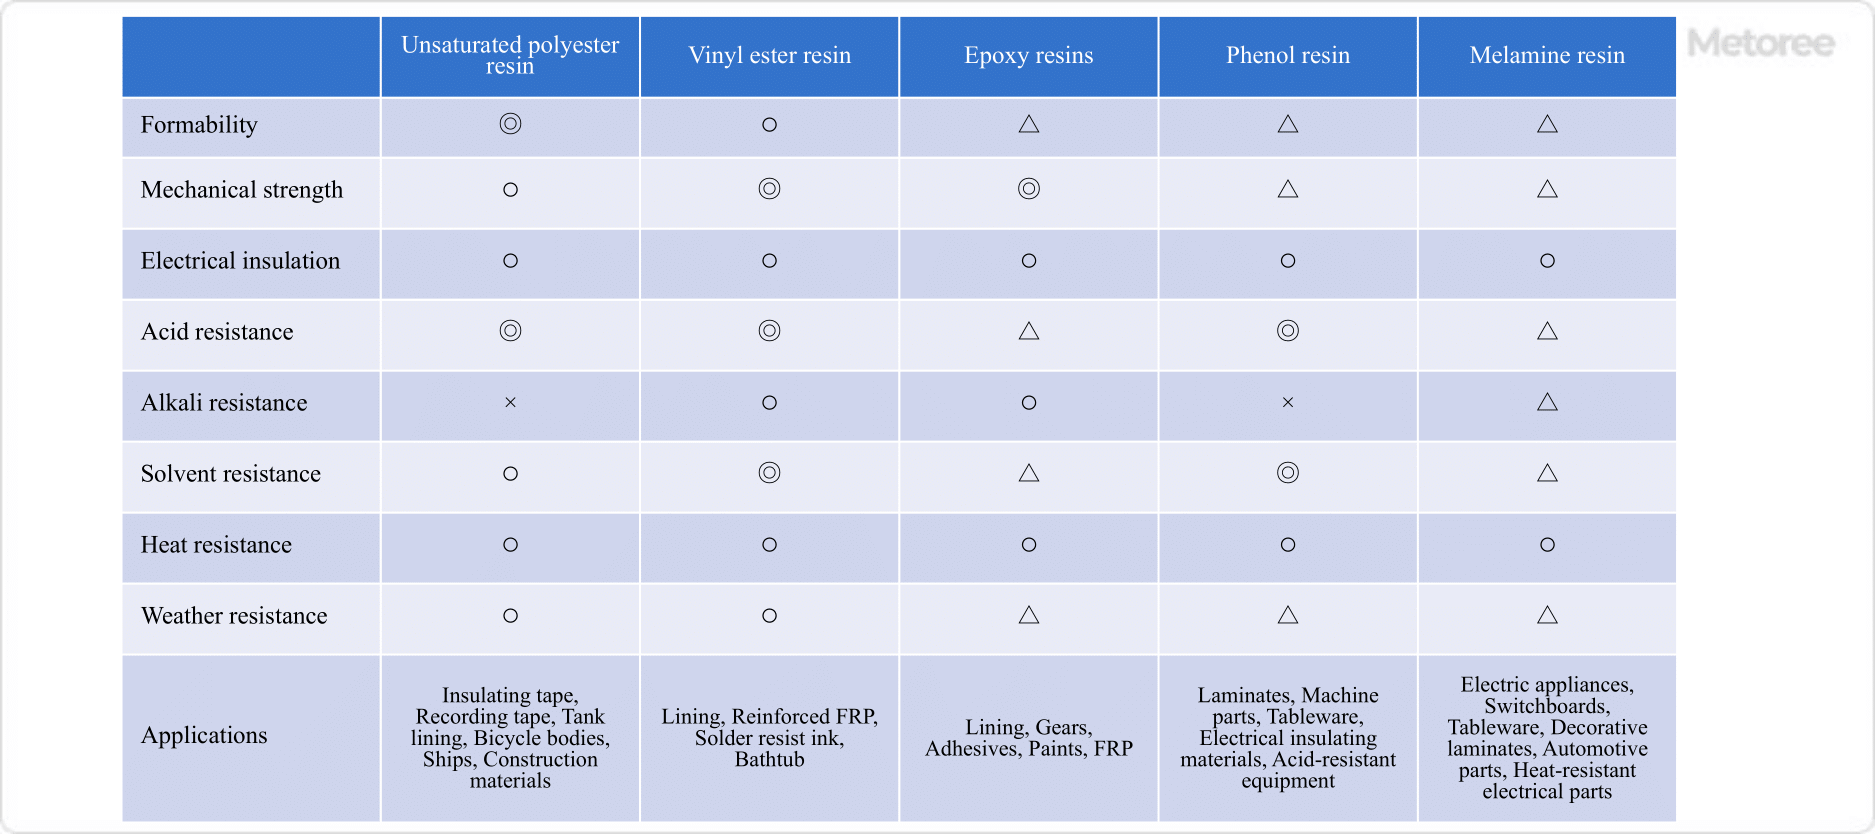 Figure 3. Comparison of physical properties of thermosetting resins